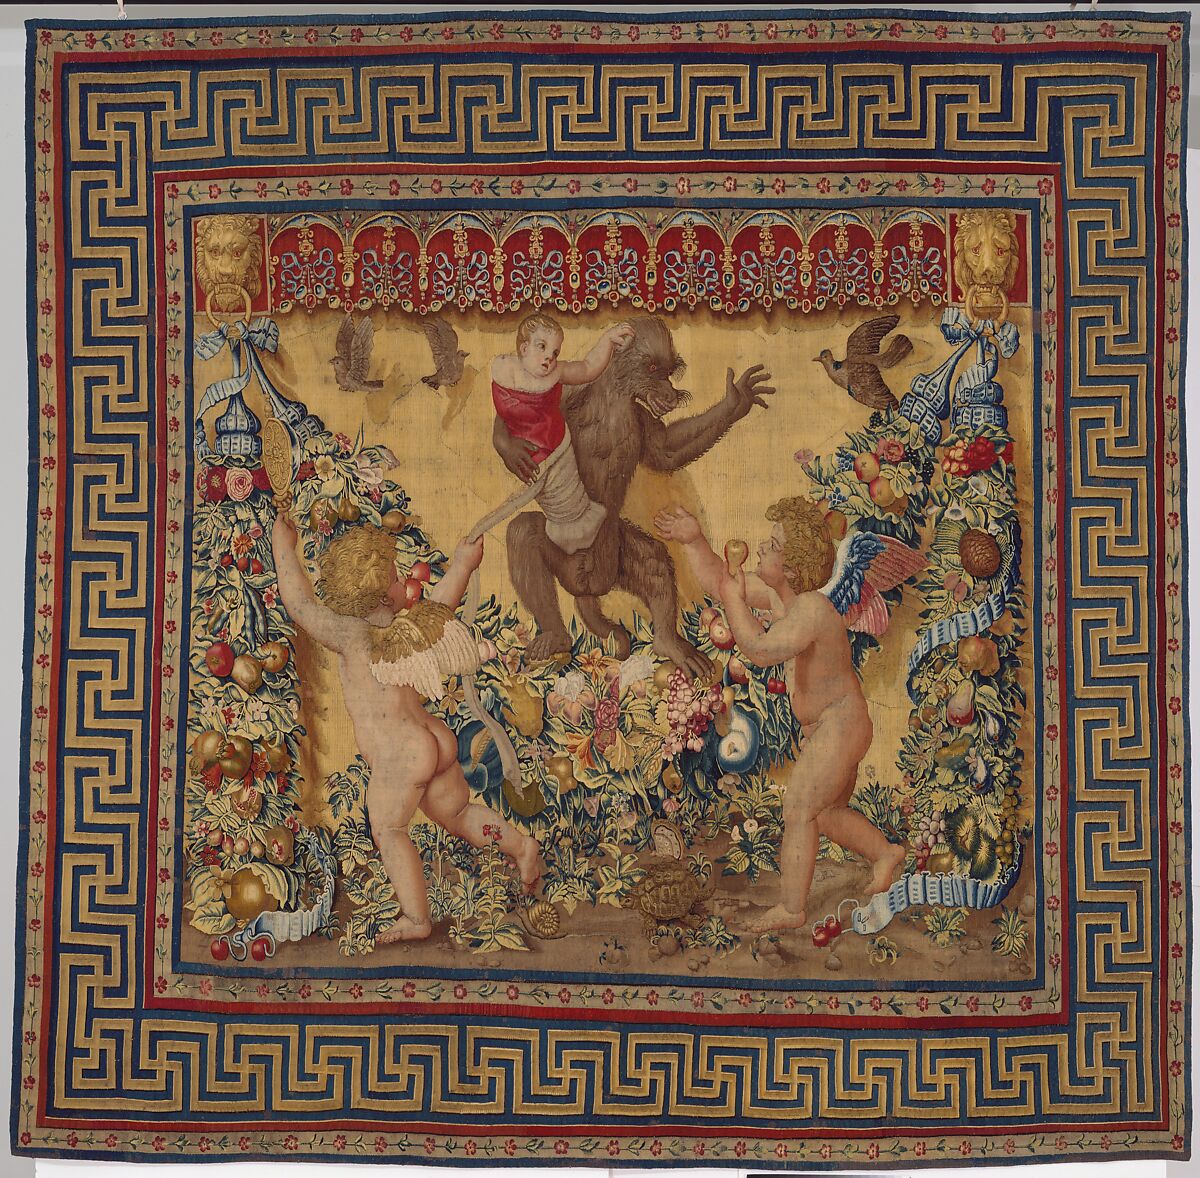 Two Putti Trying To Stop a Monkey Abducting a Child from a set of the Giochi di Putti, Design attributed to Giovanni da Udine (Giovanni dei Ricamatori) (Italian, Udine 1487–1564 Rome), Wool warps, wool and silk wefts, Italian, Rome 